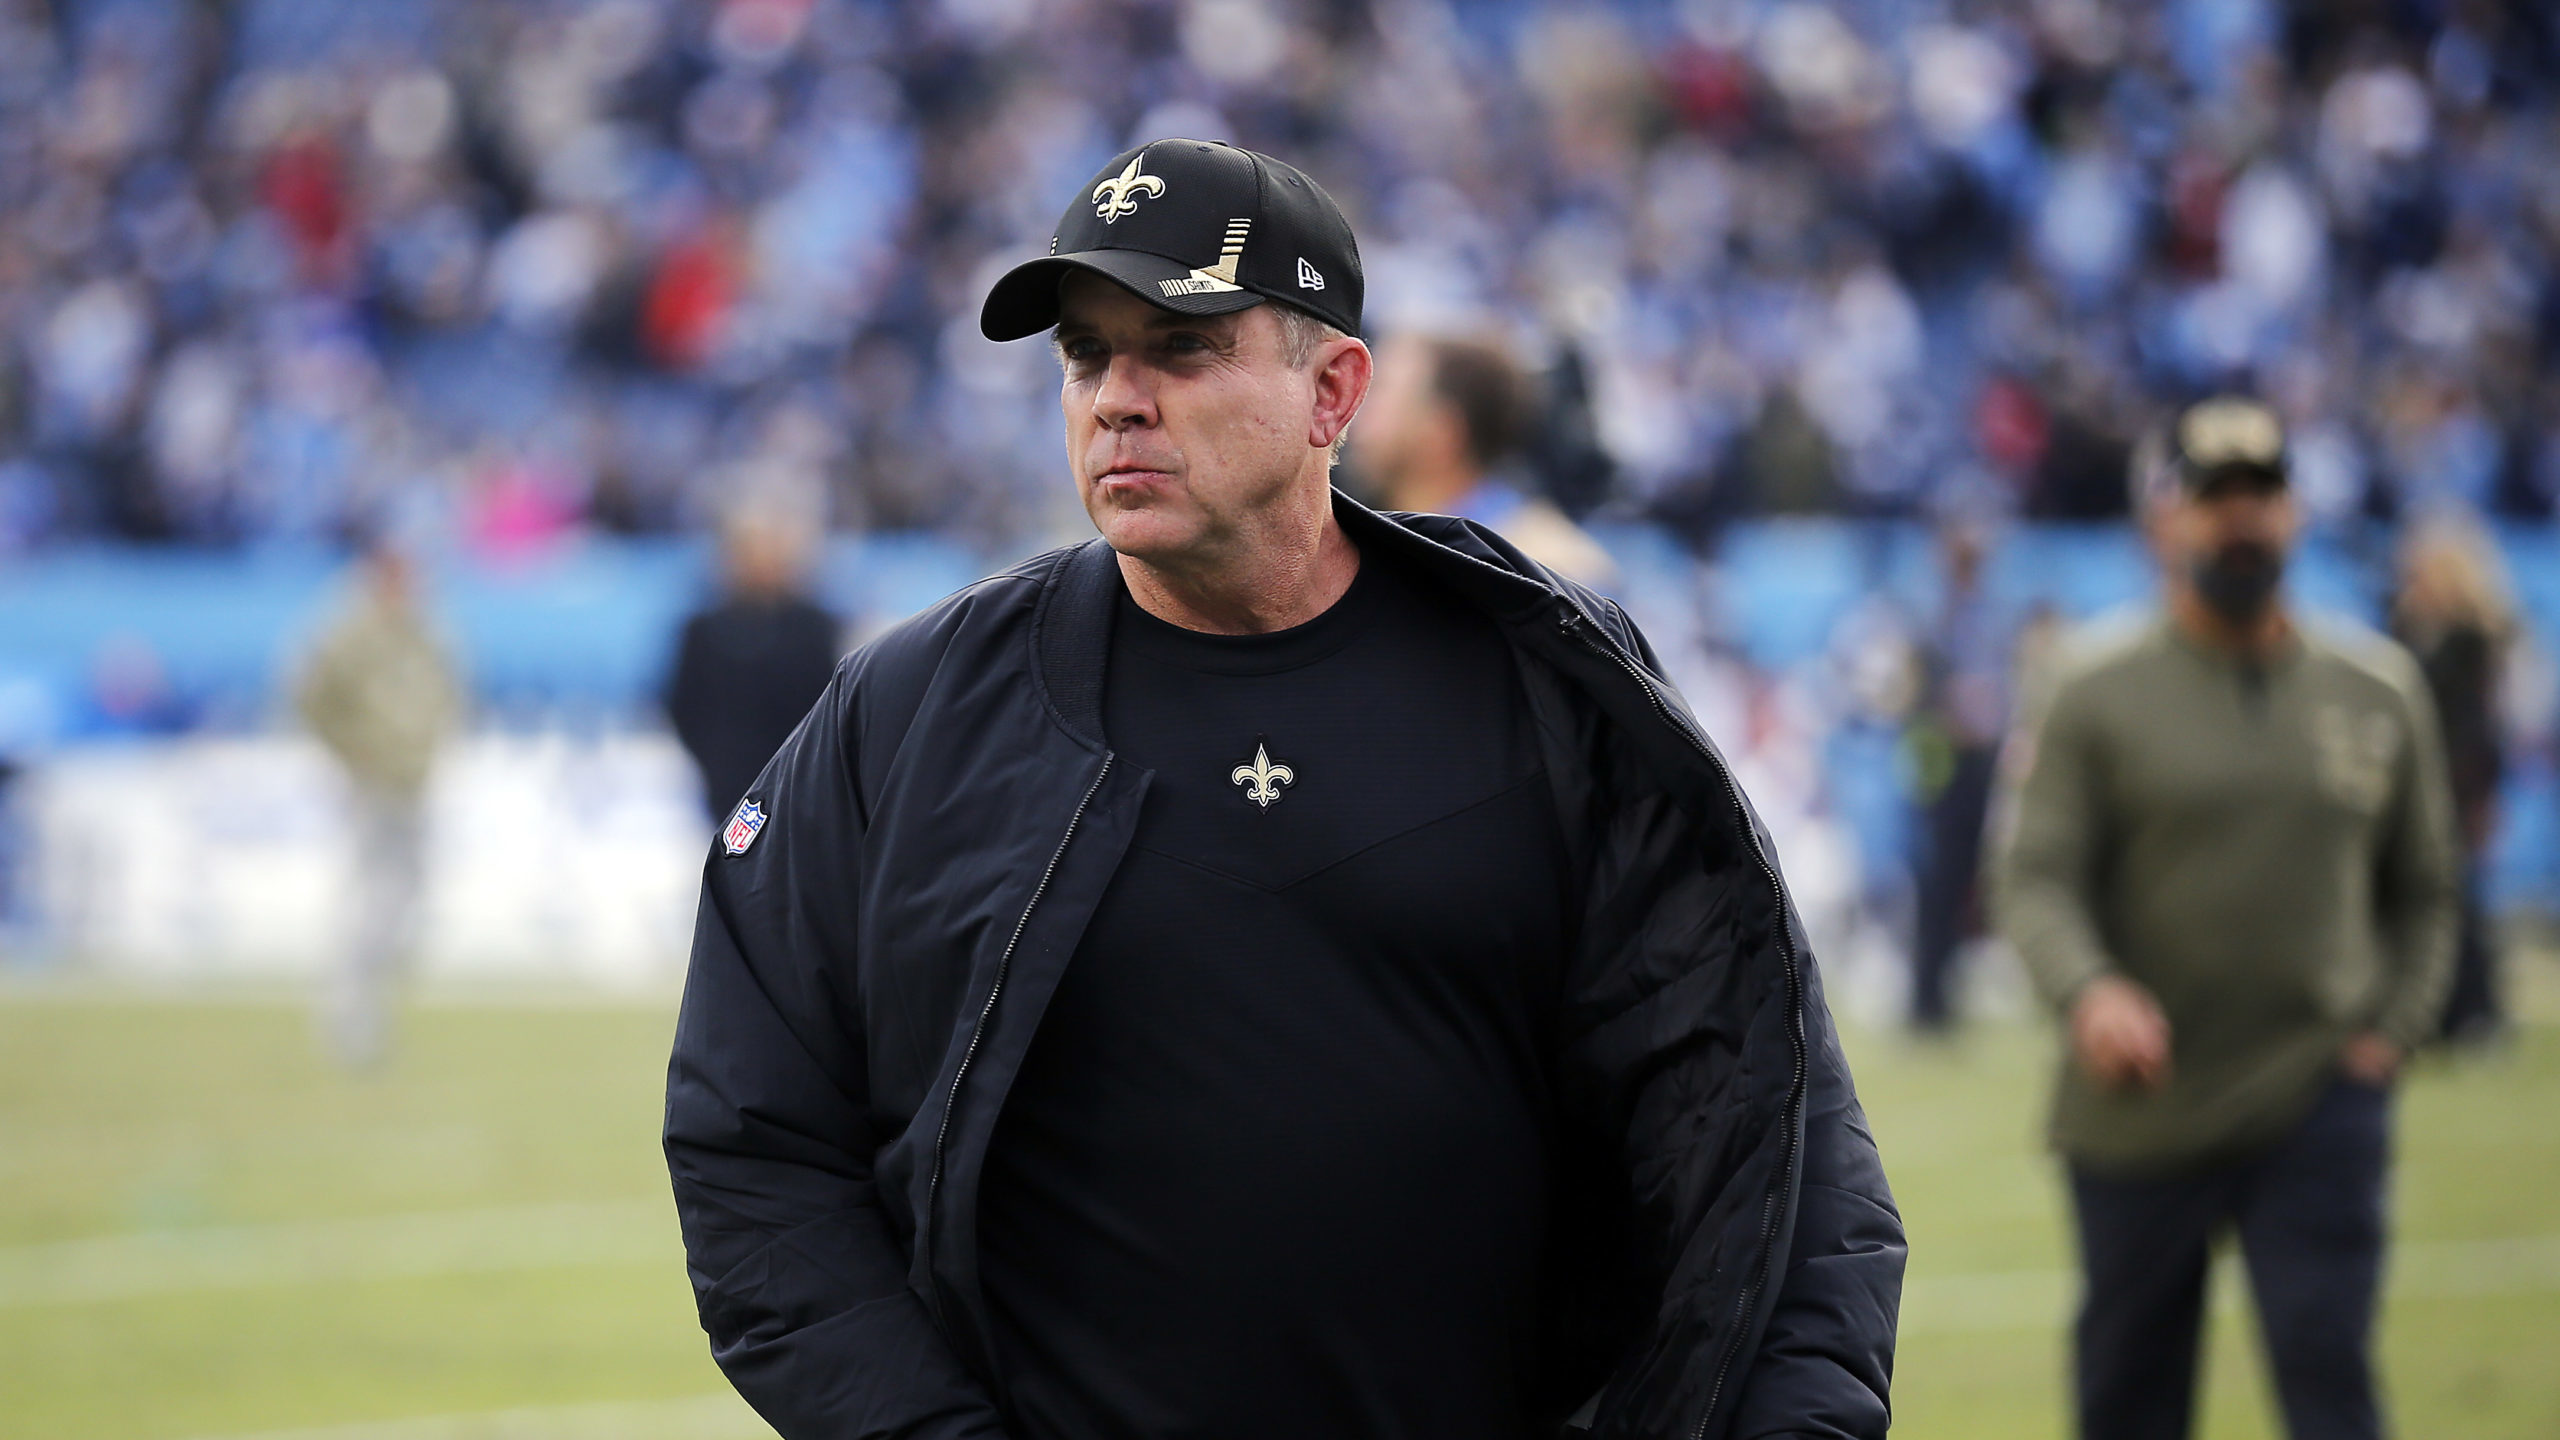 Sean Payton can interview with Cardinals as Saints grant permission